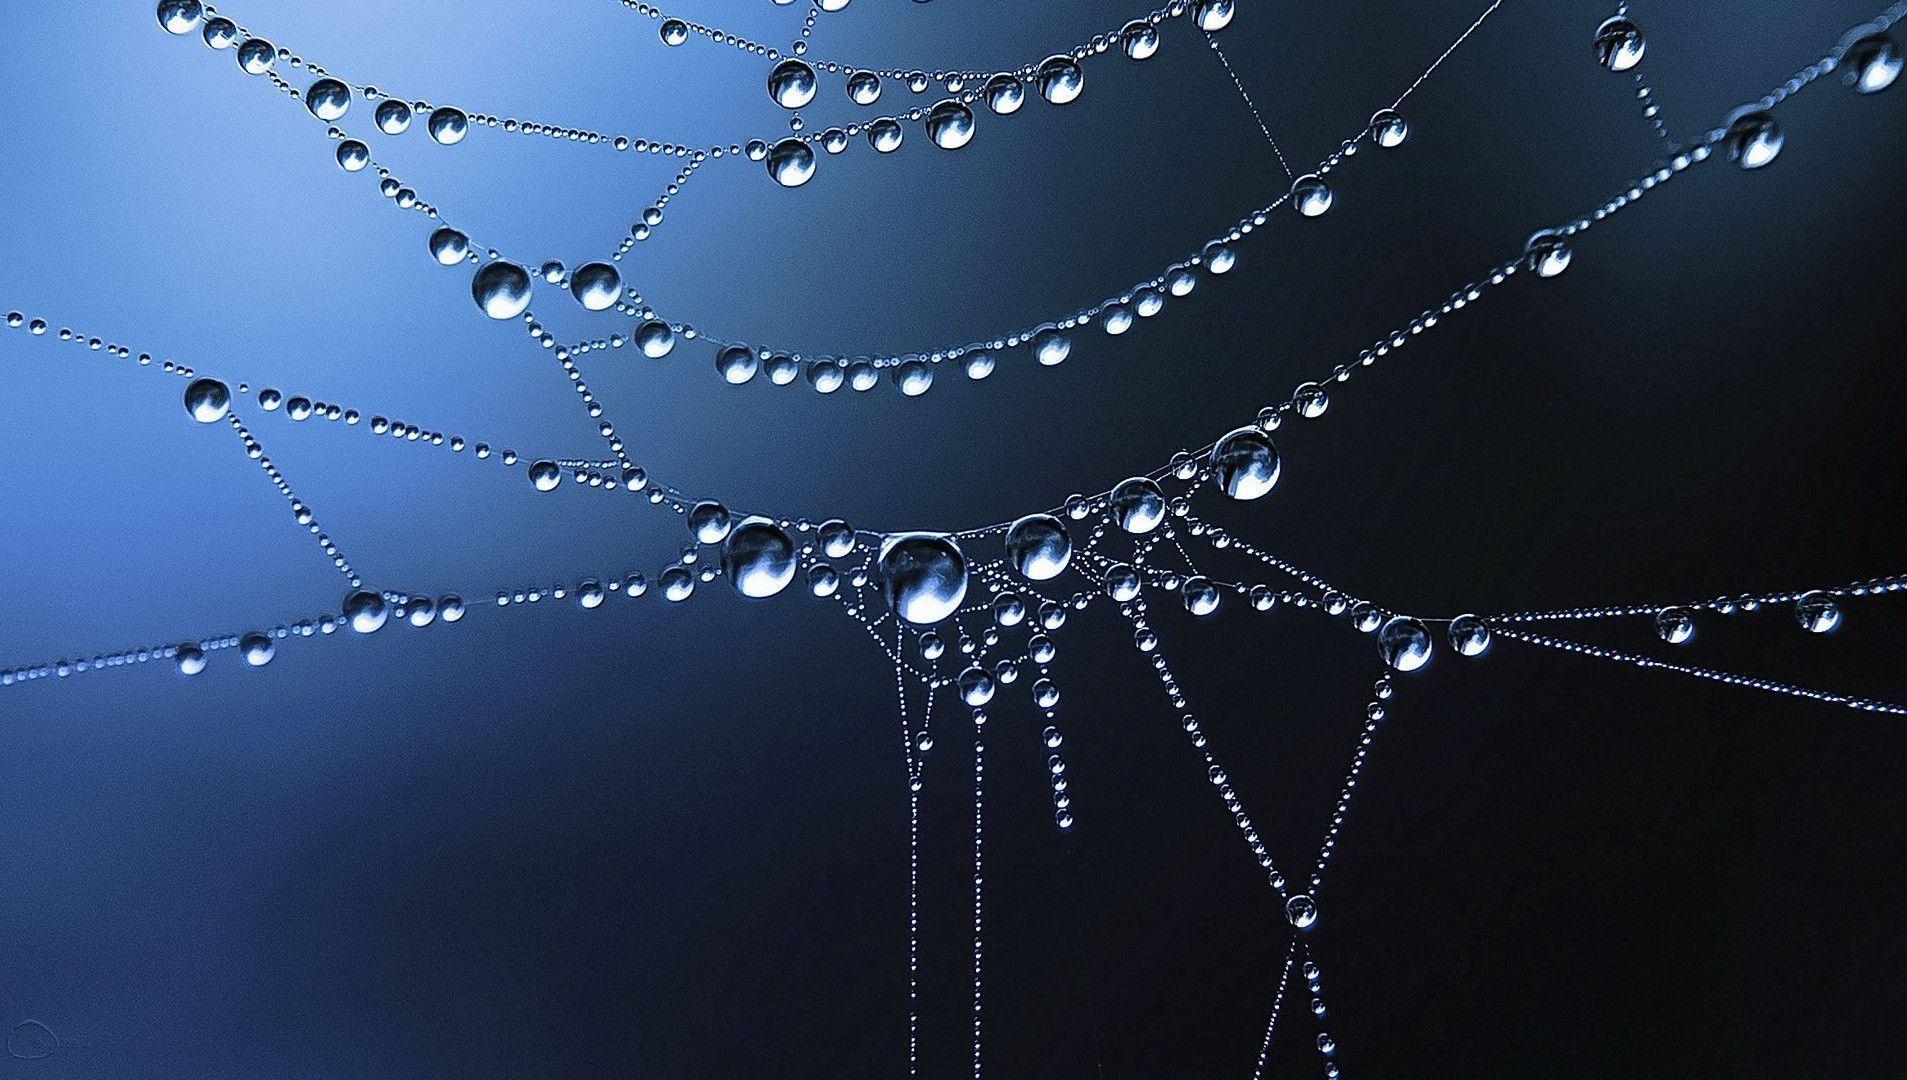 Frozen Waterdrops on Spider Web Wallpaper and Photo Download